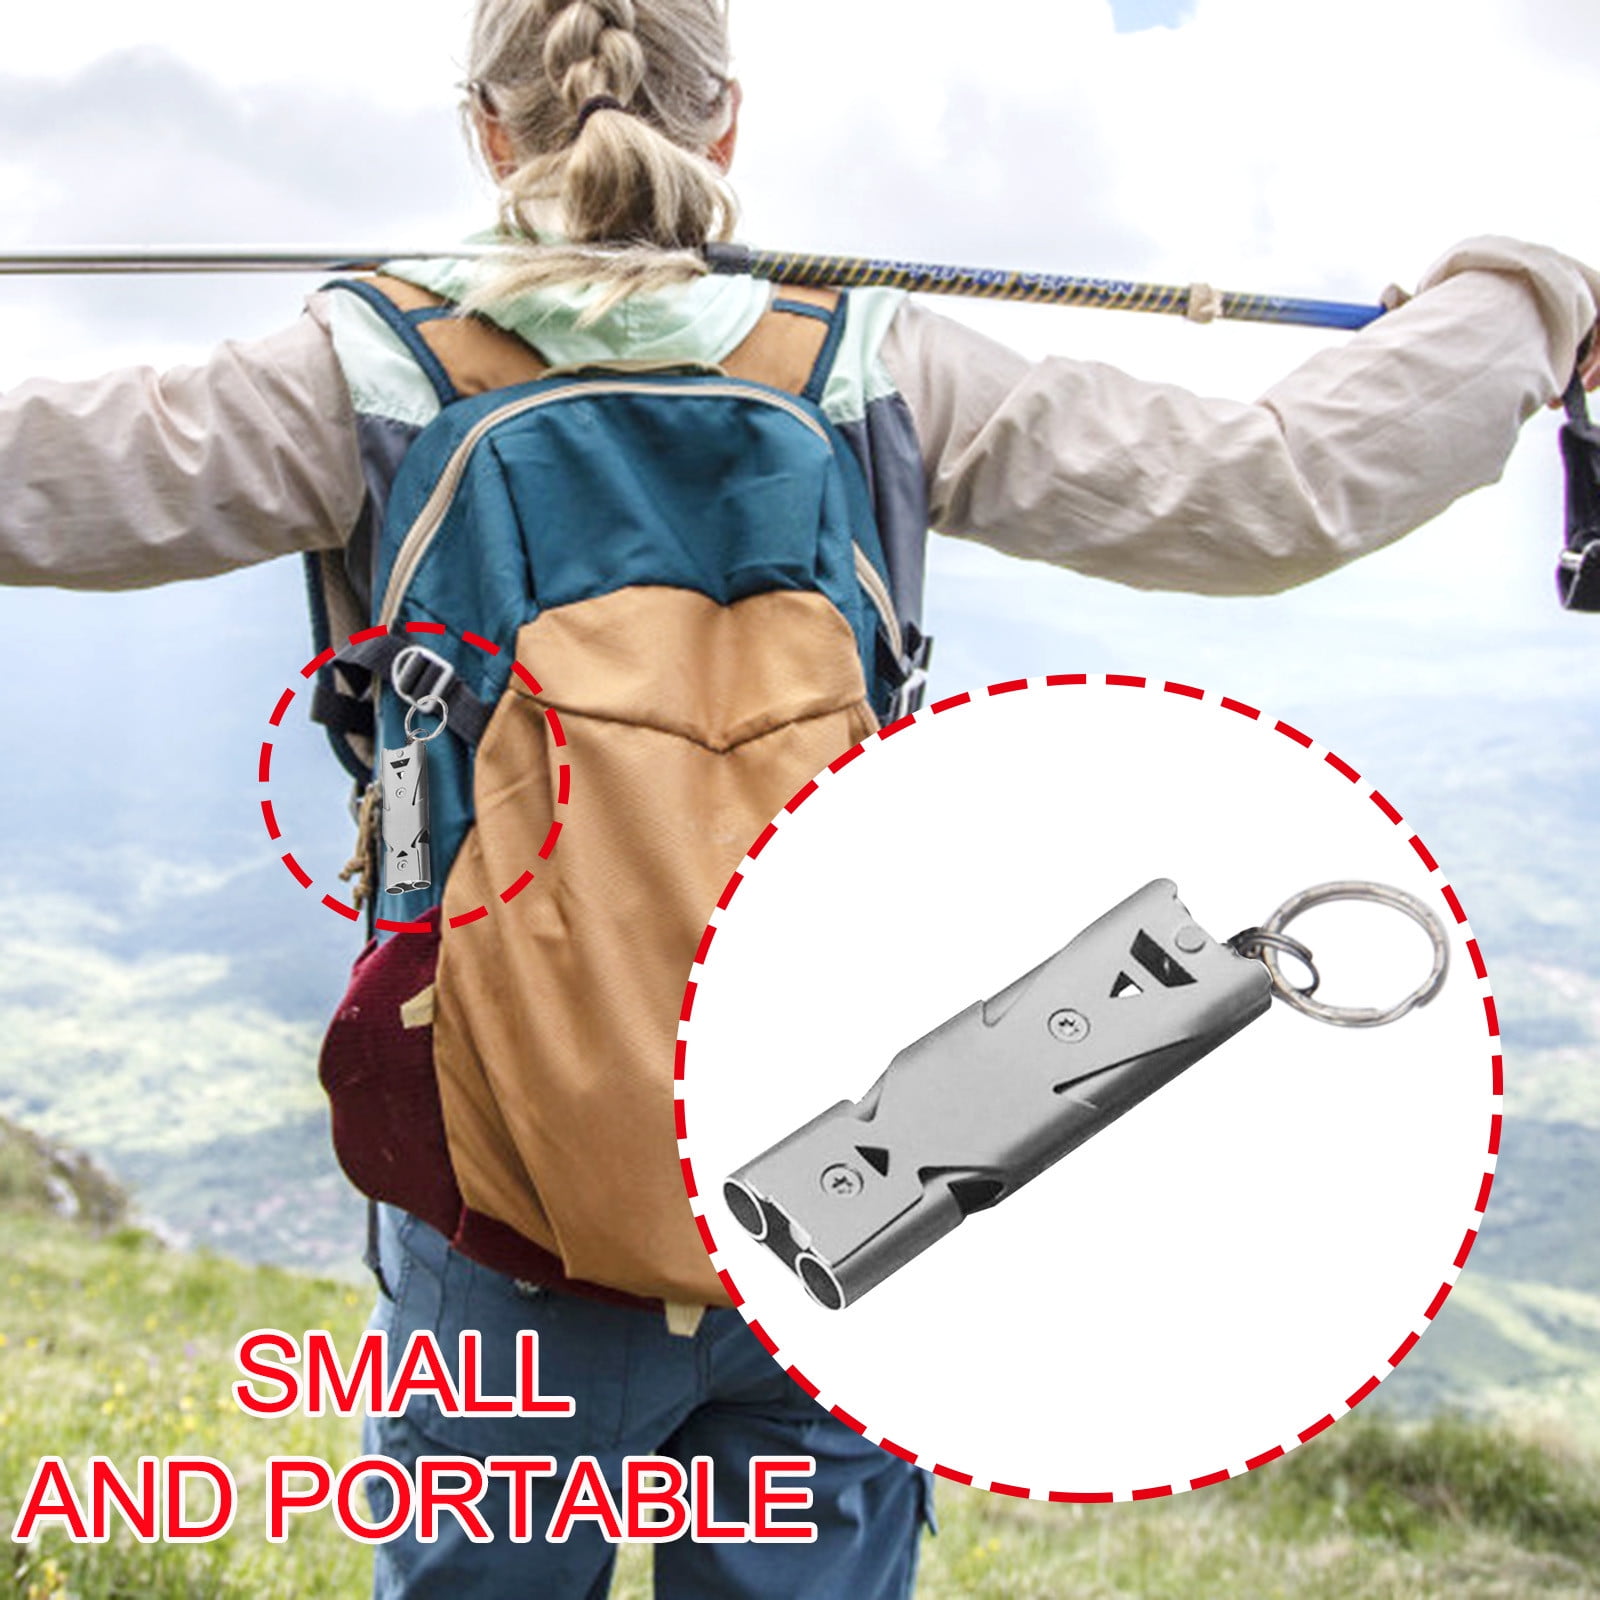 stainless whistle double tube lifesaving emergency outdoor survival whistle Pip 